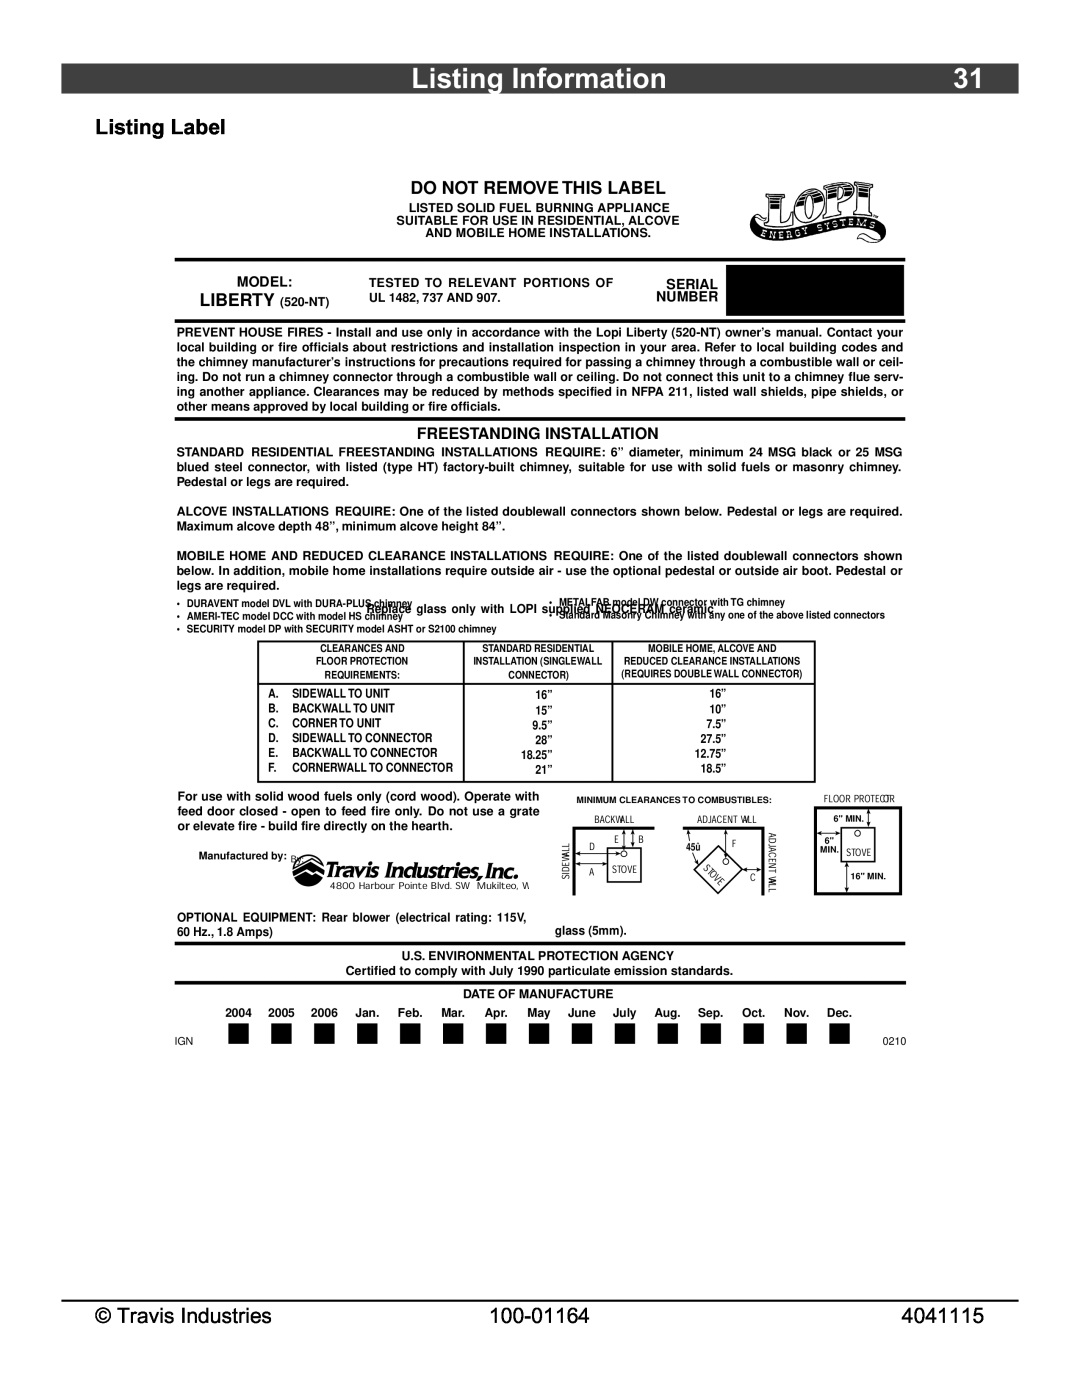 Lopi Liberty Wood Stove Listing Information, Travis Industries, 100-01164, 4041115, Do Not Remove This Label, Model 